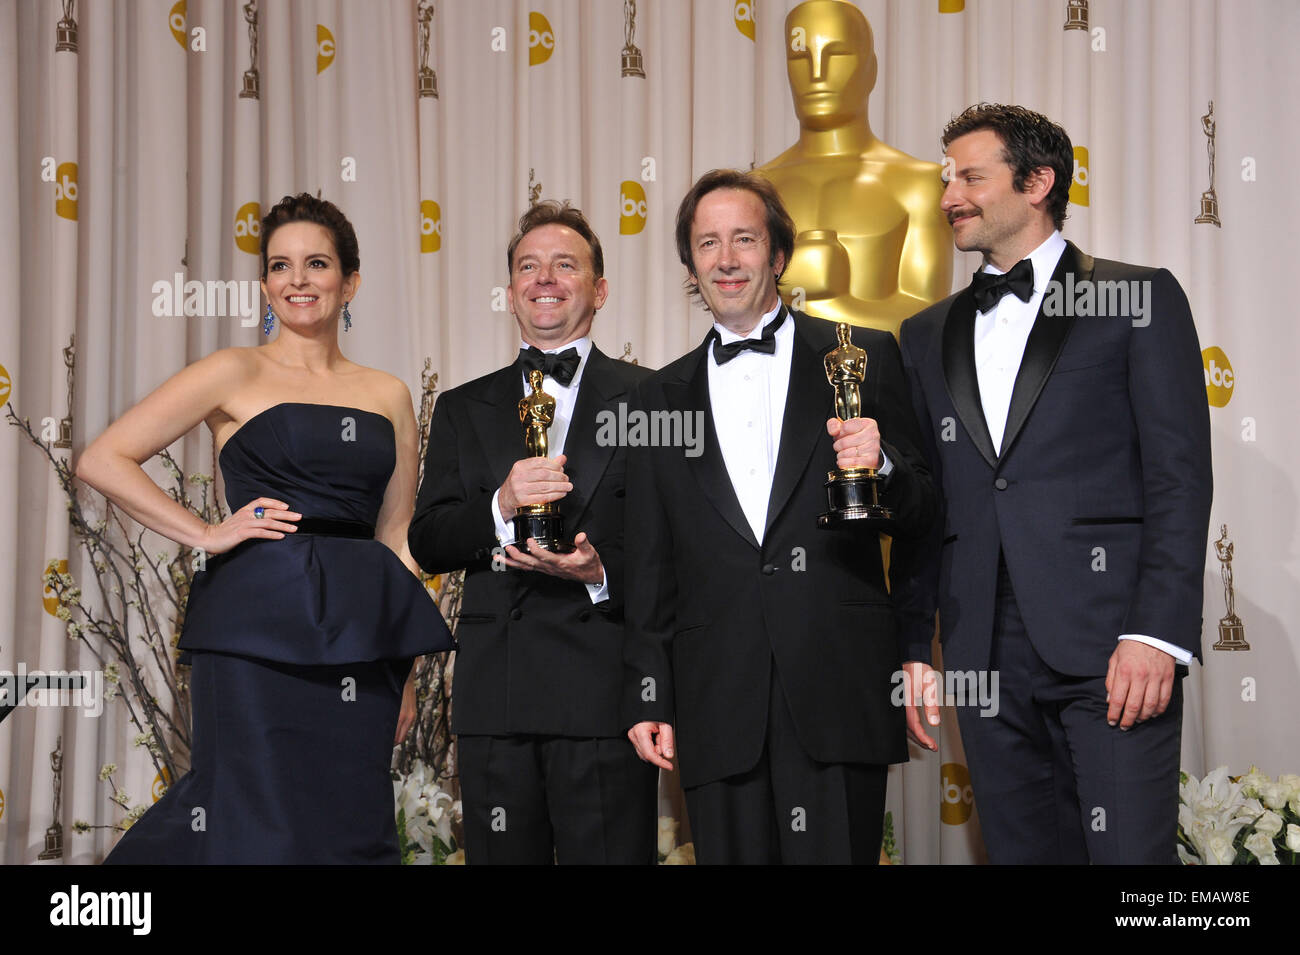 LOS ANGELES, CA - FEBRUARY 26, 2012: Philip Stockton & Eugene Gearty, winners for Best Sound Editing for Hugo, with presenters Tina Fey & Bradley Cooper at the 82nd Academy Awards at the Hollywood & Highland Theatre, Hollywood. Stock Photo